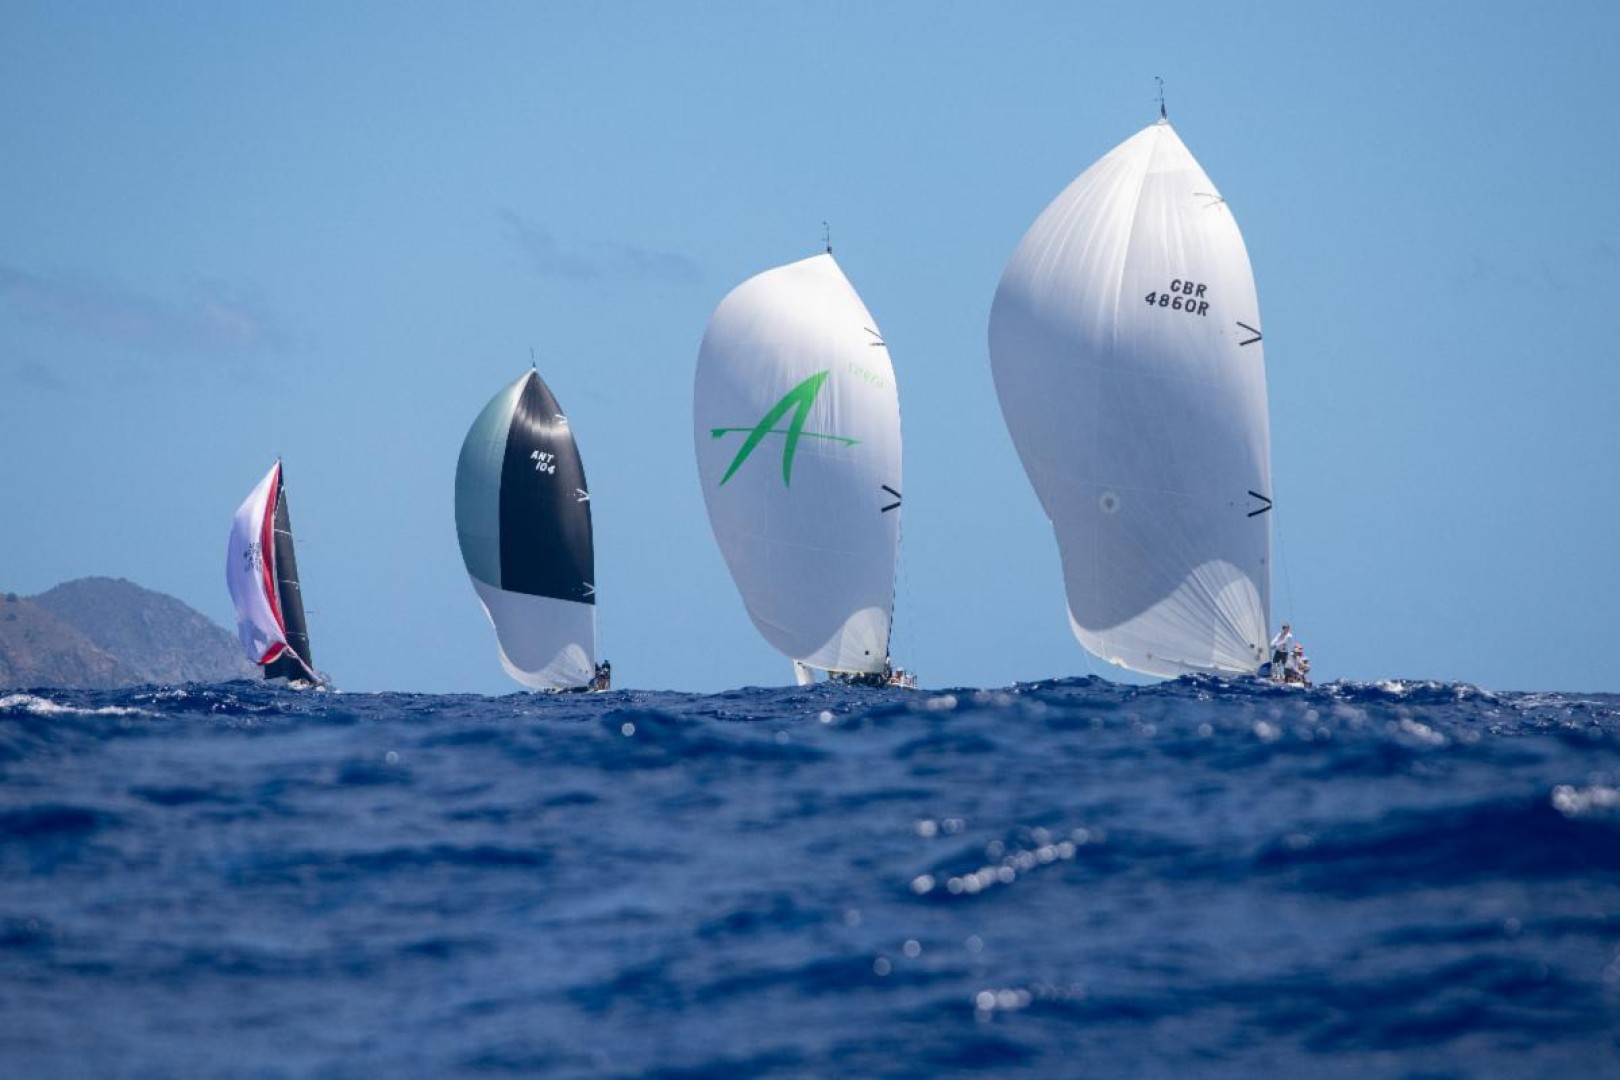 Champagne sailing on the final day of the BVI Spring Regatta & Sailing Festival ©Alastair Abrehart